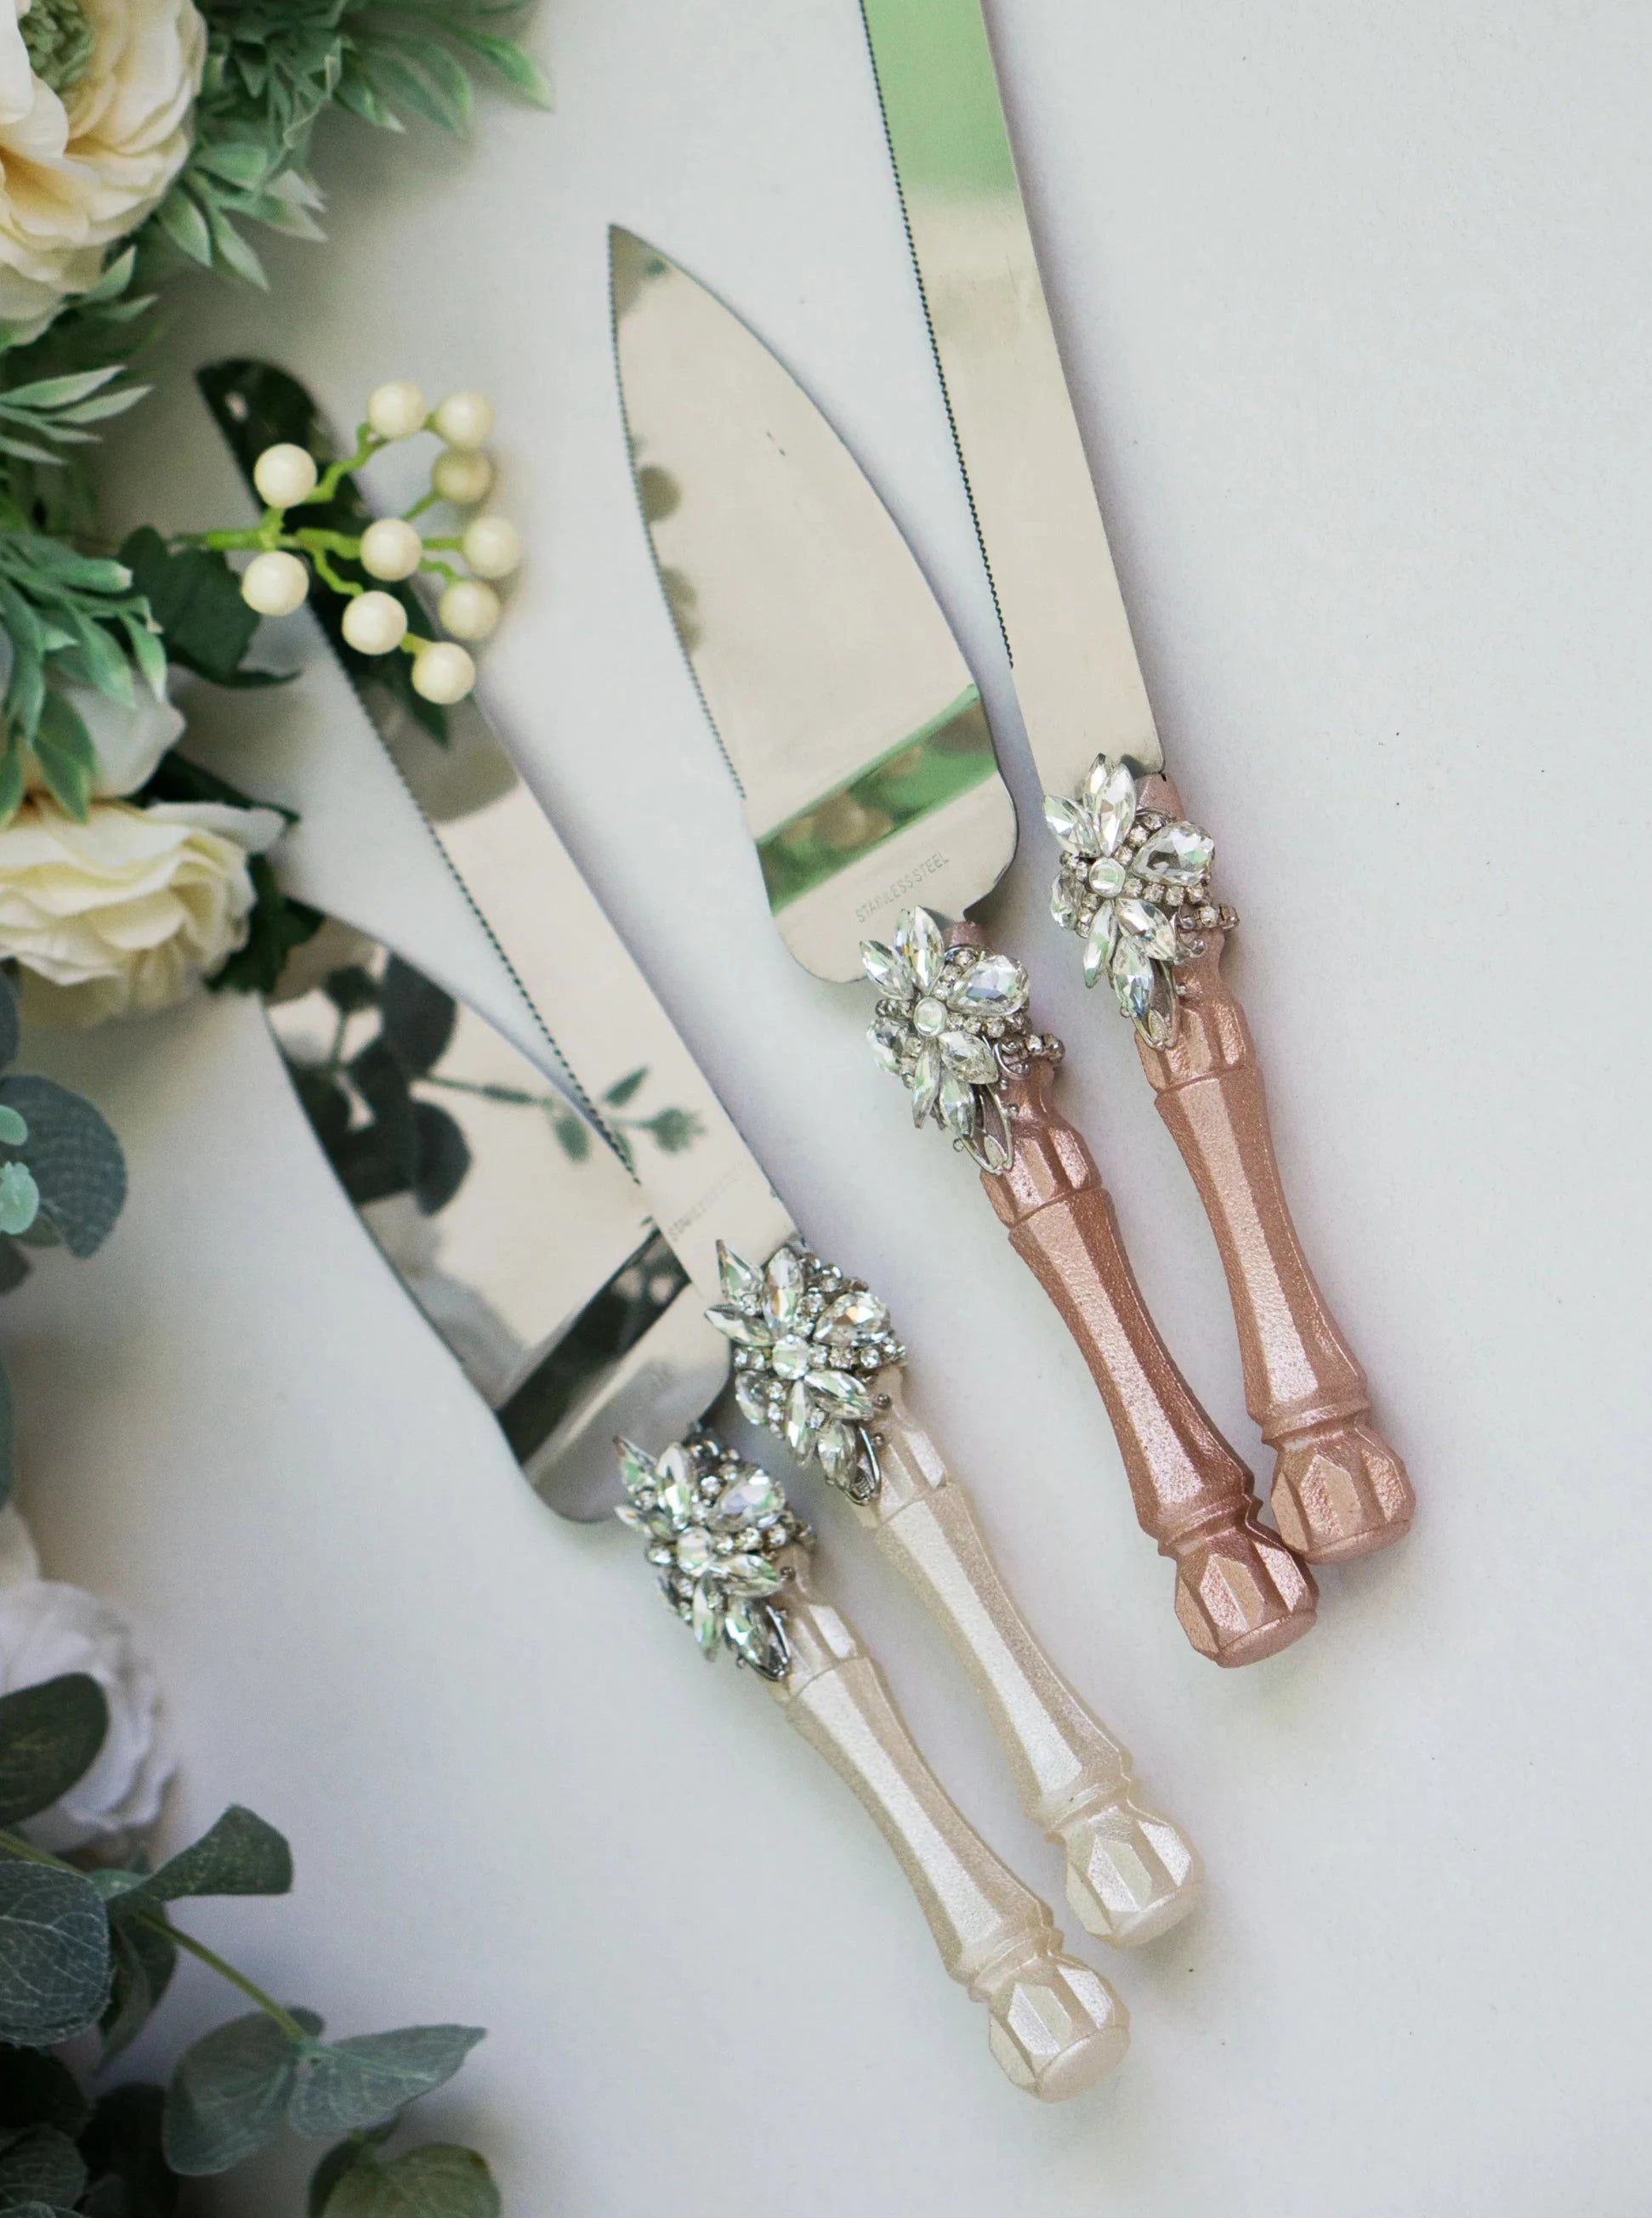 Custom cake knife and server with crystals